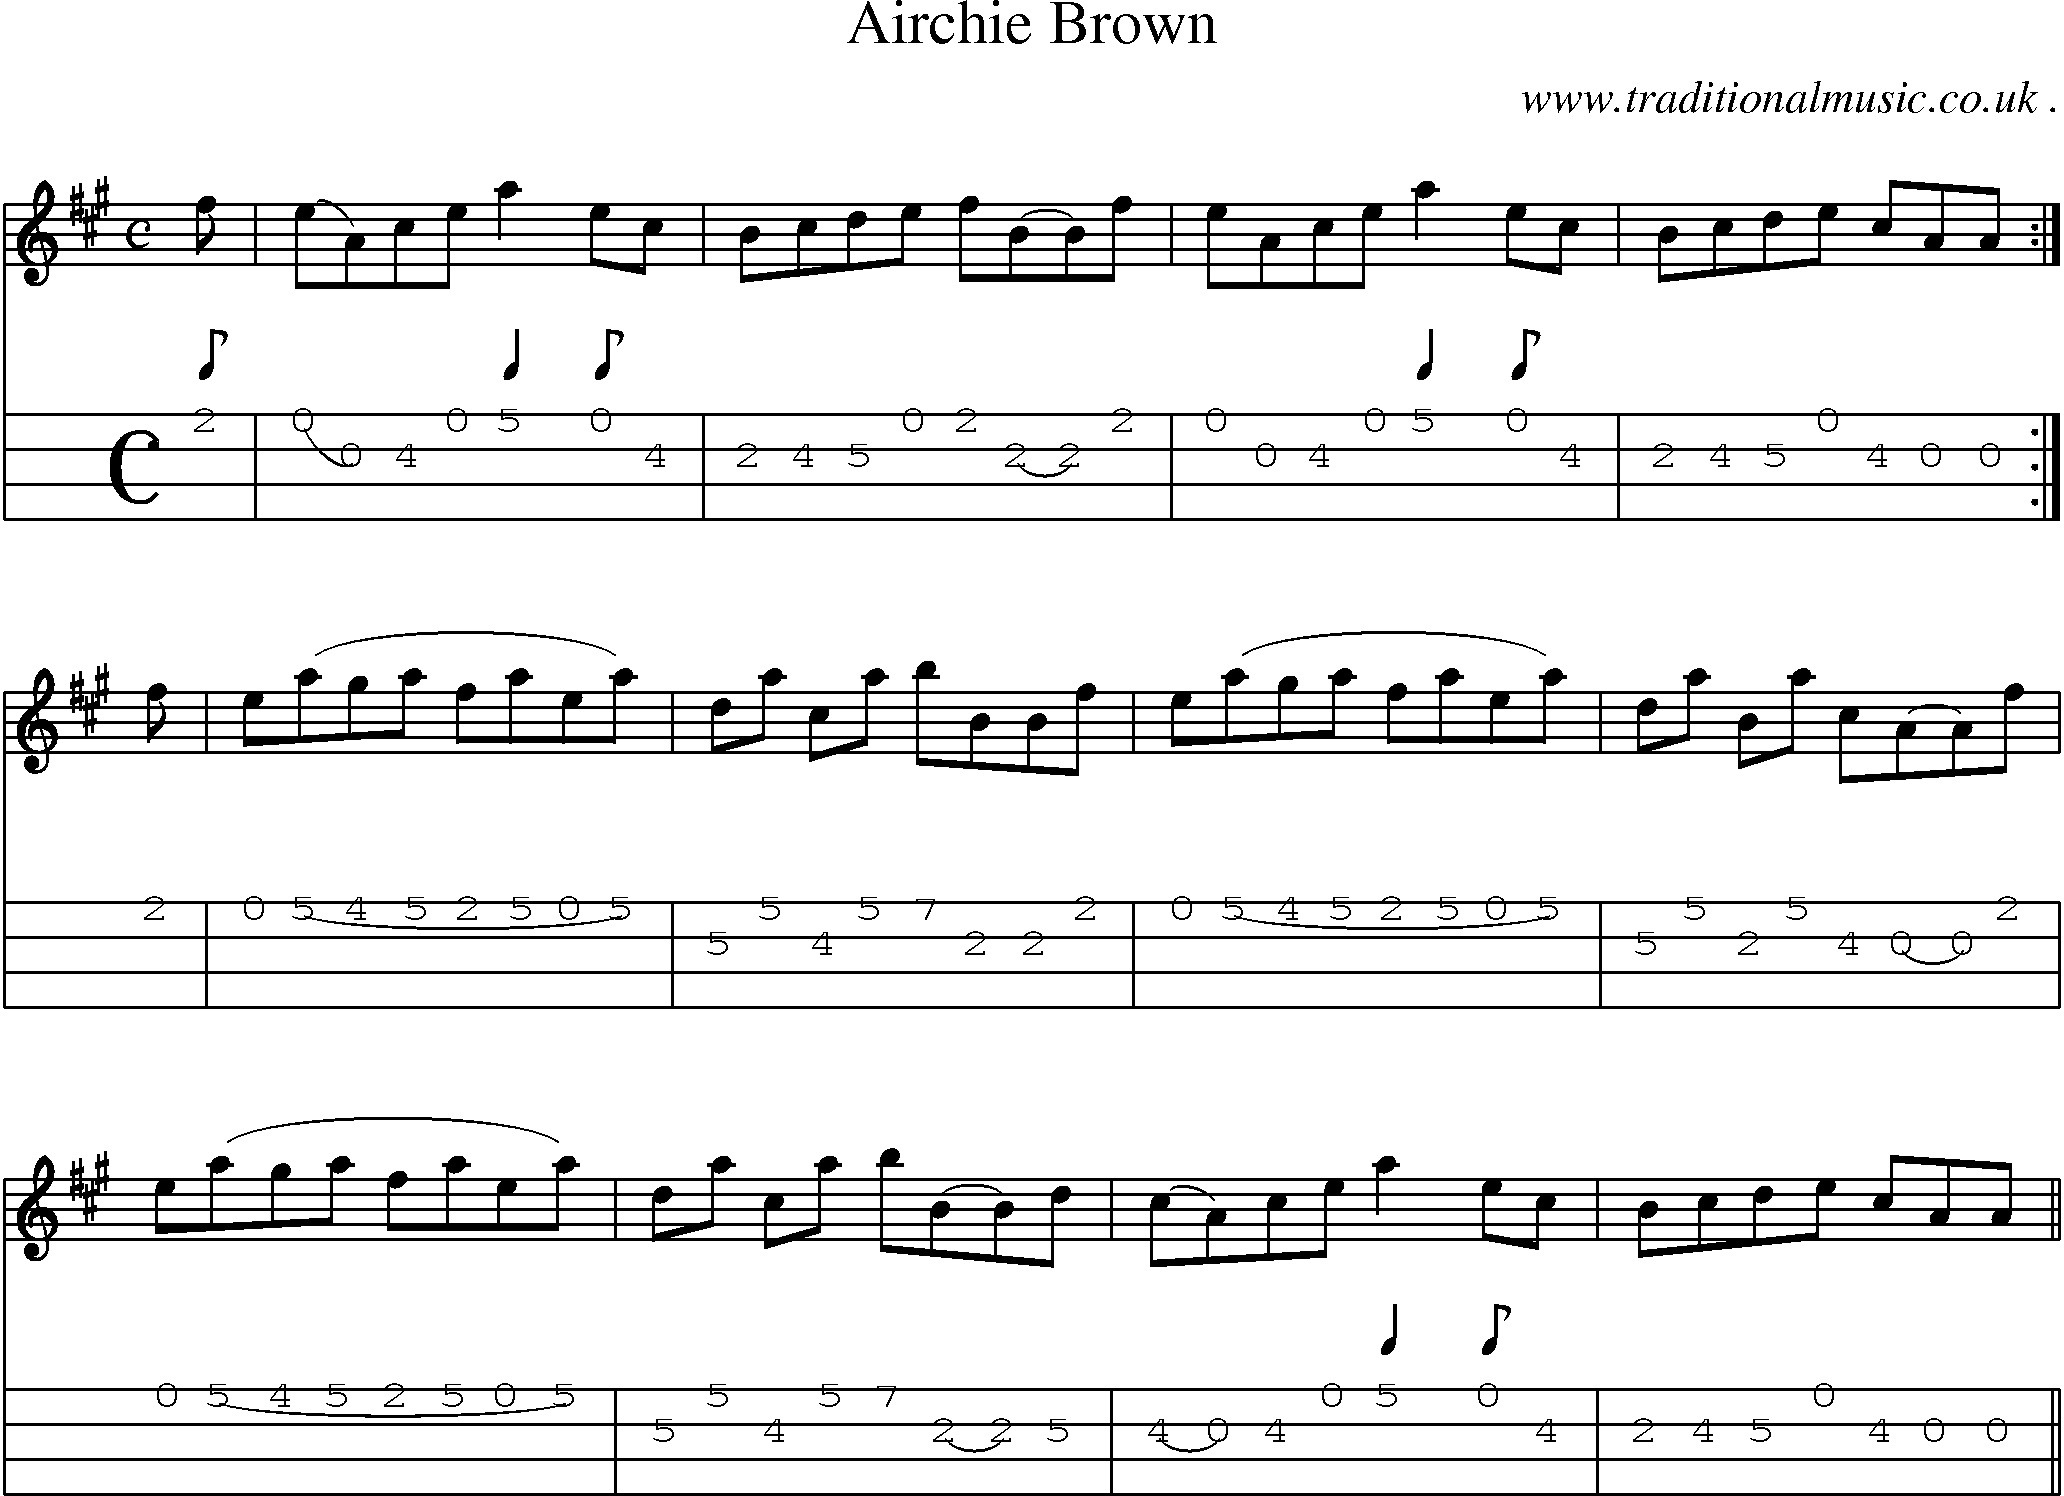 Sheet-music  score, Chords and Mandolin Tabs for Airchie Brown